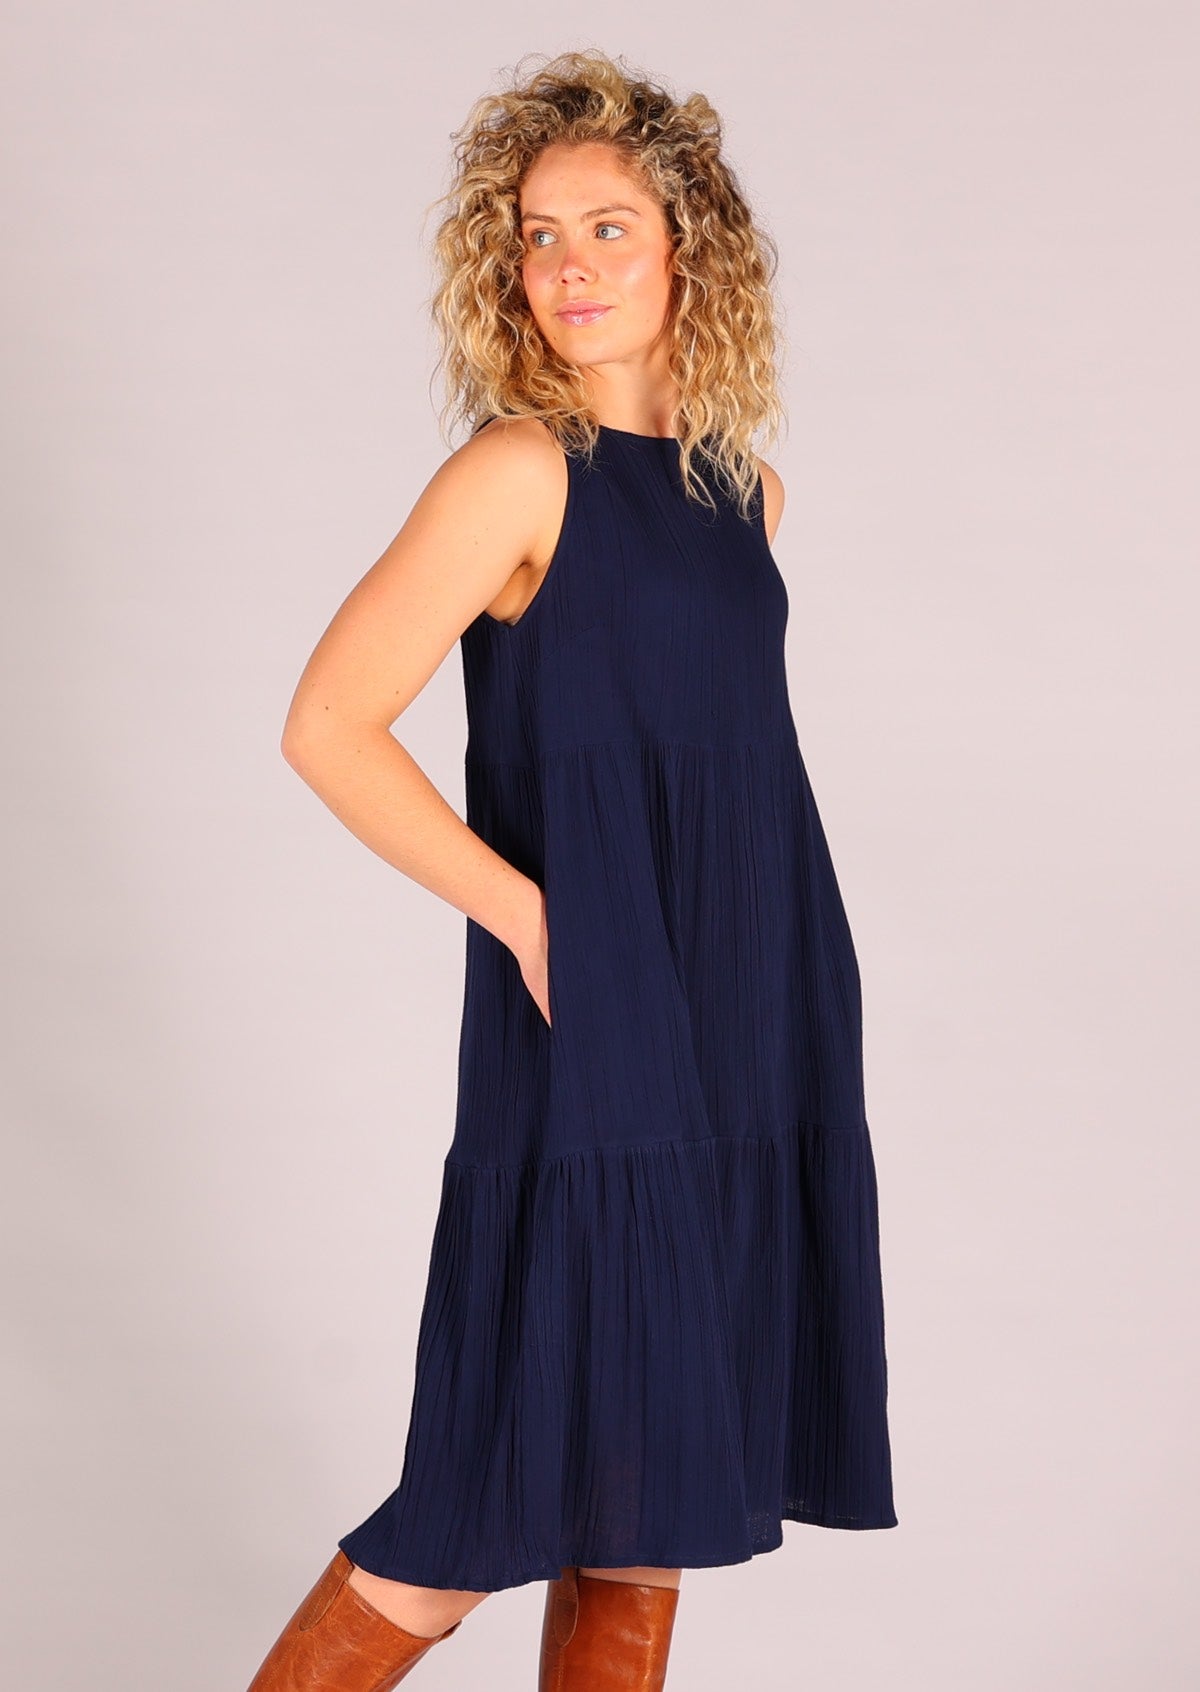 Sleeveless double cotton dress with high neckline and three tiers